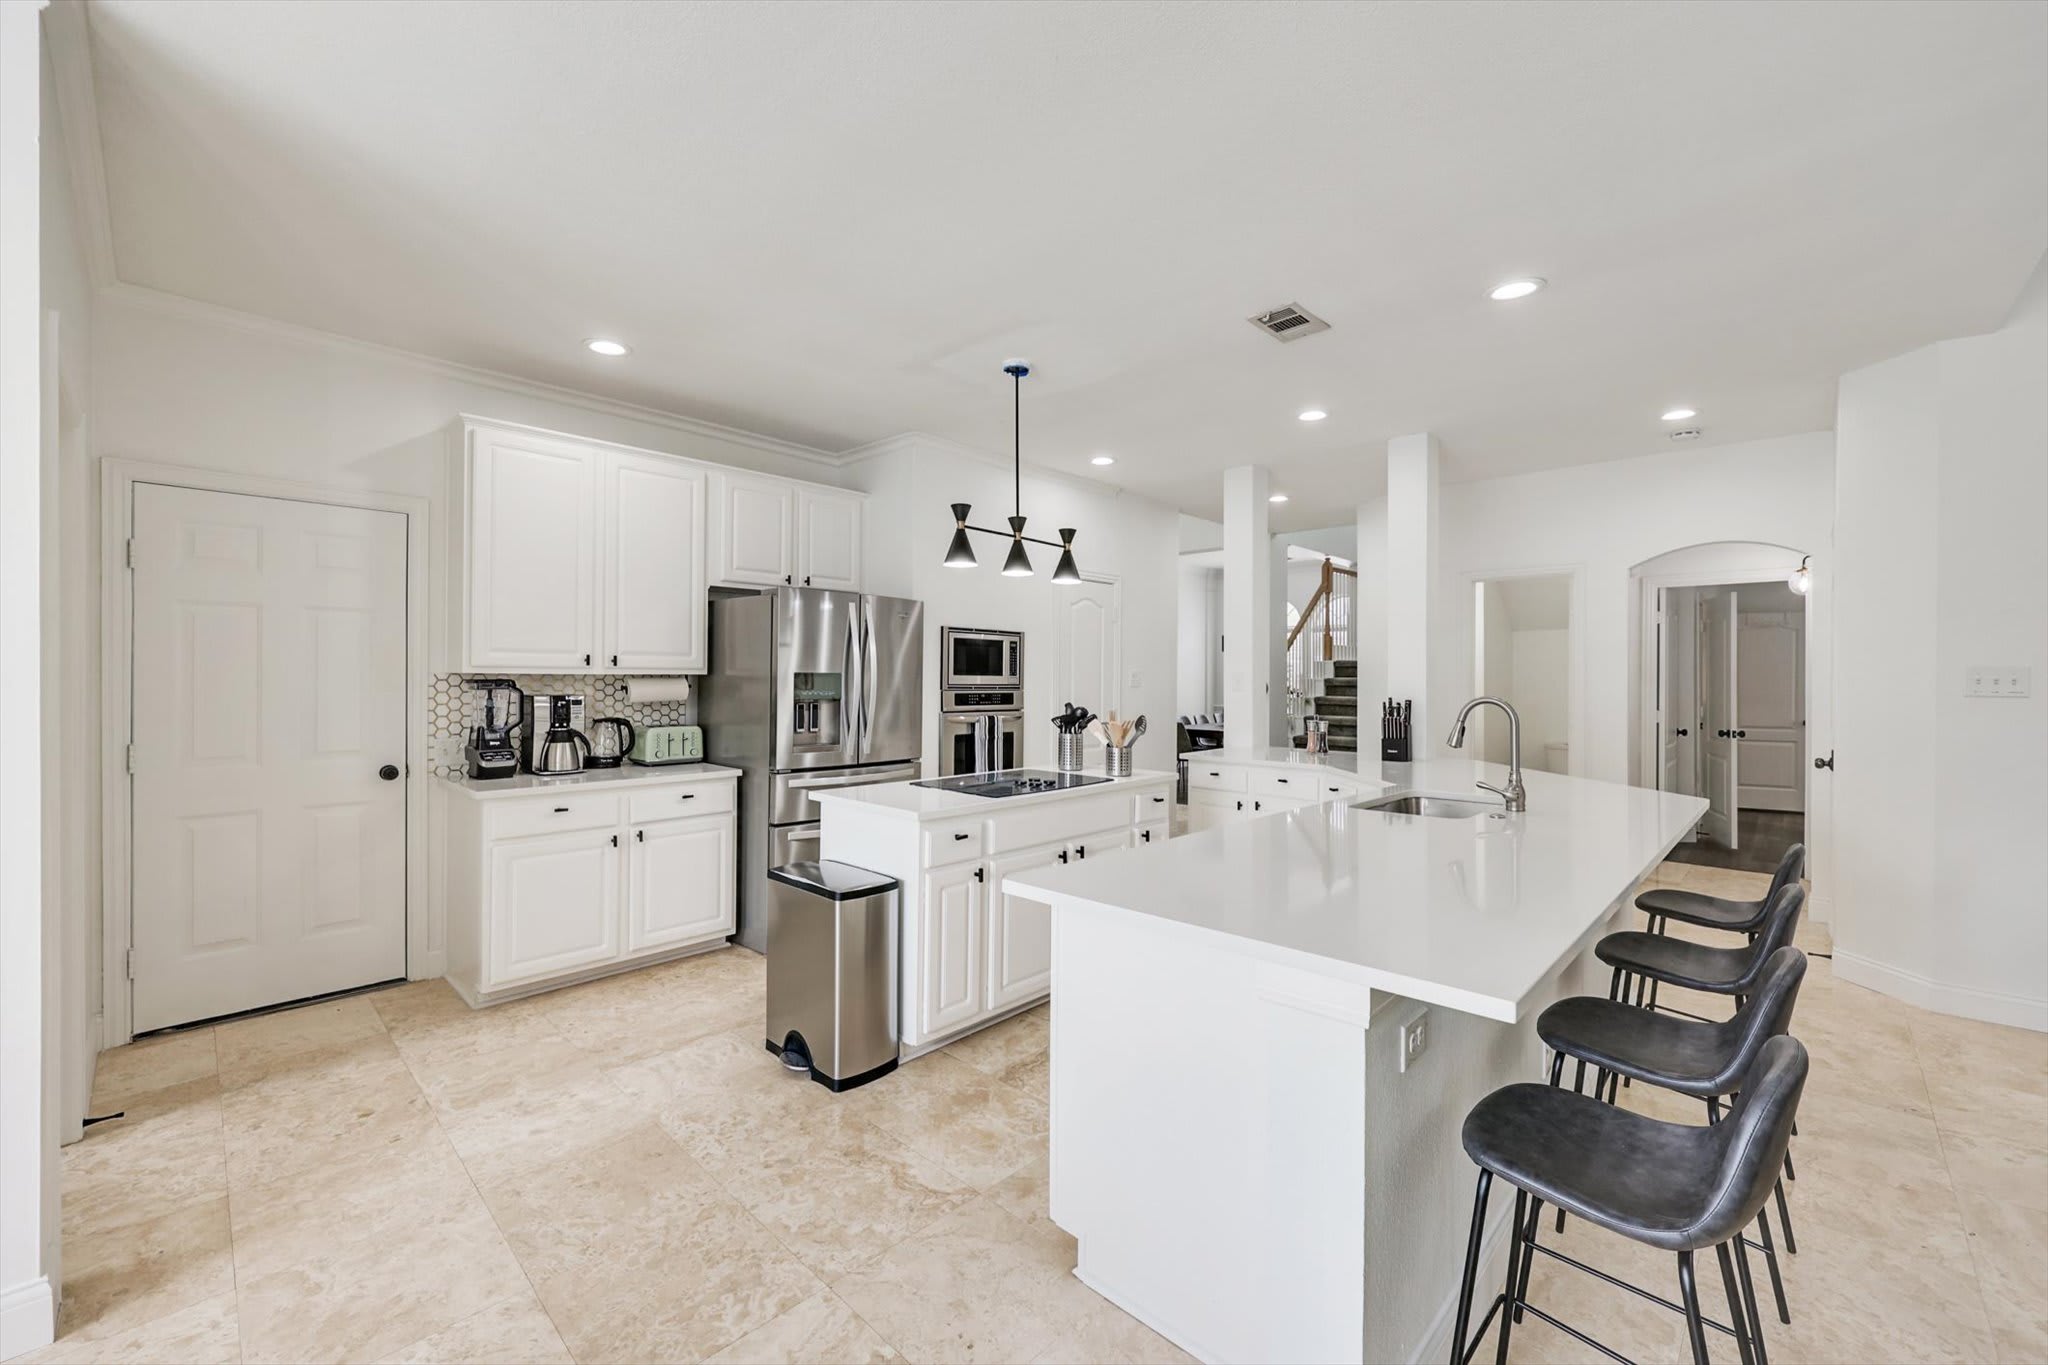 This fully equipped kitchen is grand, majestic, and spacious! You’ll have a swell time cooking here!